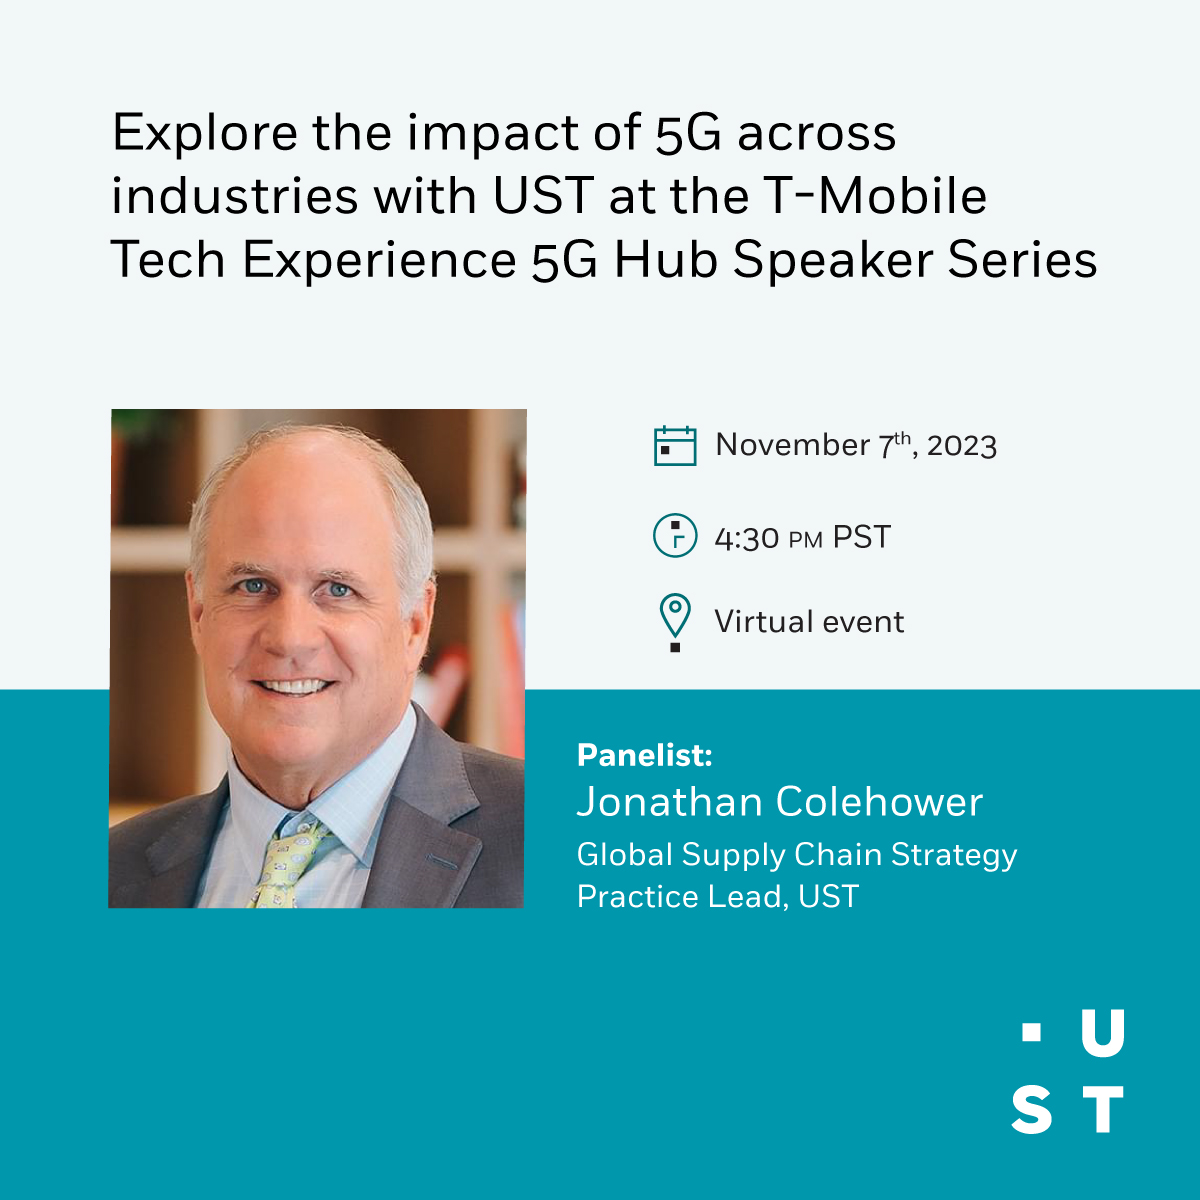 Join Jonathan Colehower, UST Global Supply Chain Strategy Practice Lead, at the T-Mobile @TechExperience 5G Hub Speaker Series to discover strategies to stay ahead of the curve.

Register to join virtually: bit.ly/46XPZtB #2023SpeakerSeries #supplychain